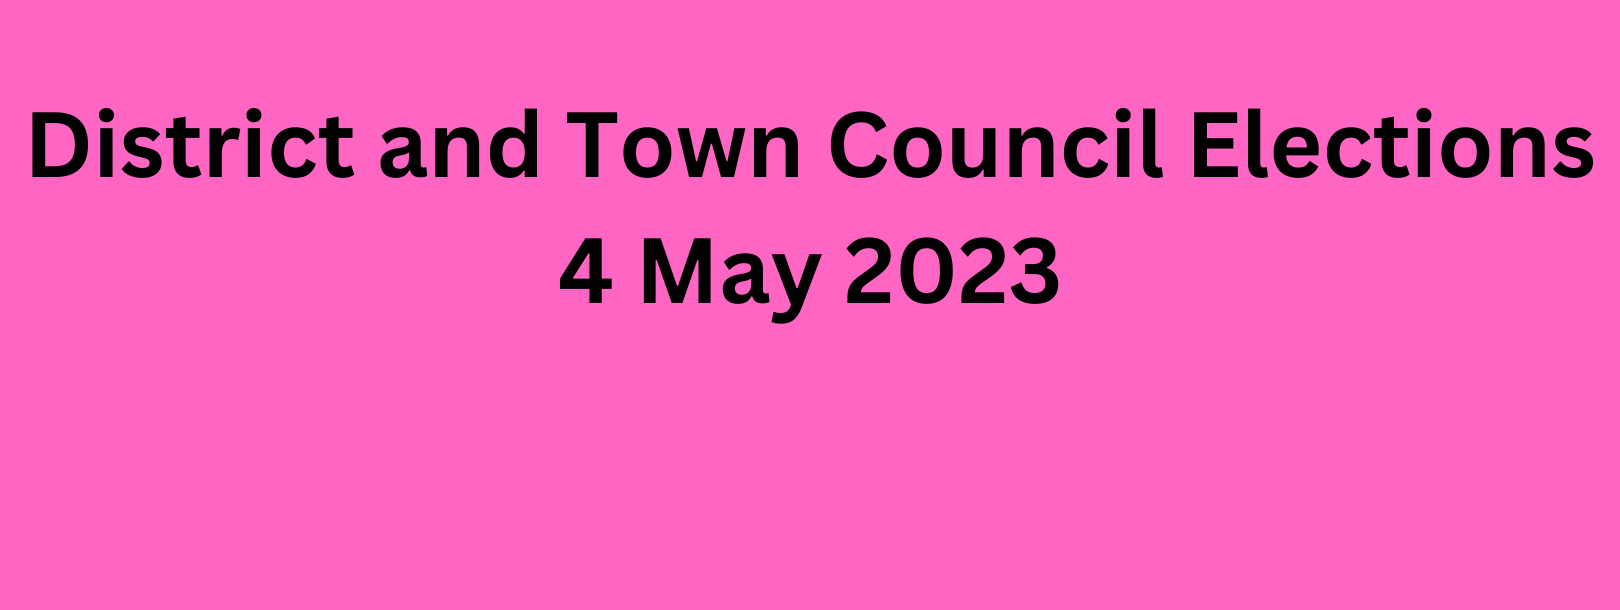 District and Town Council Elections - 4 May 2023